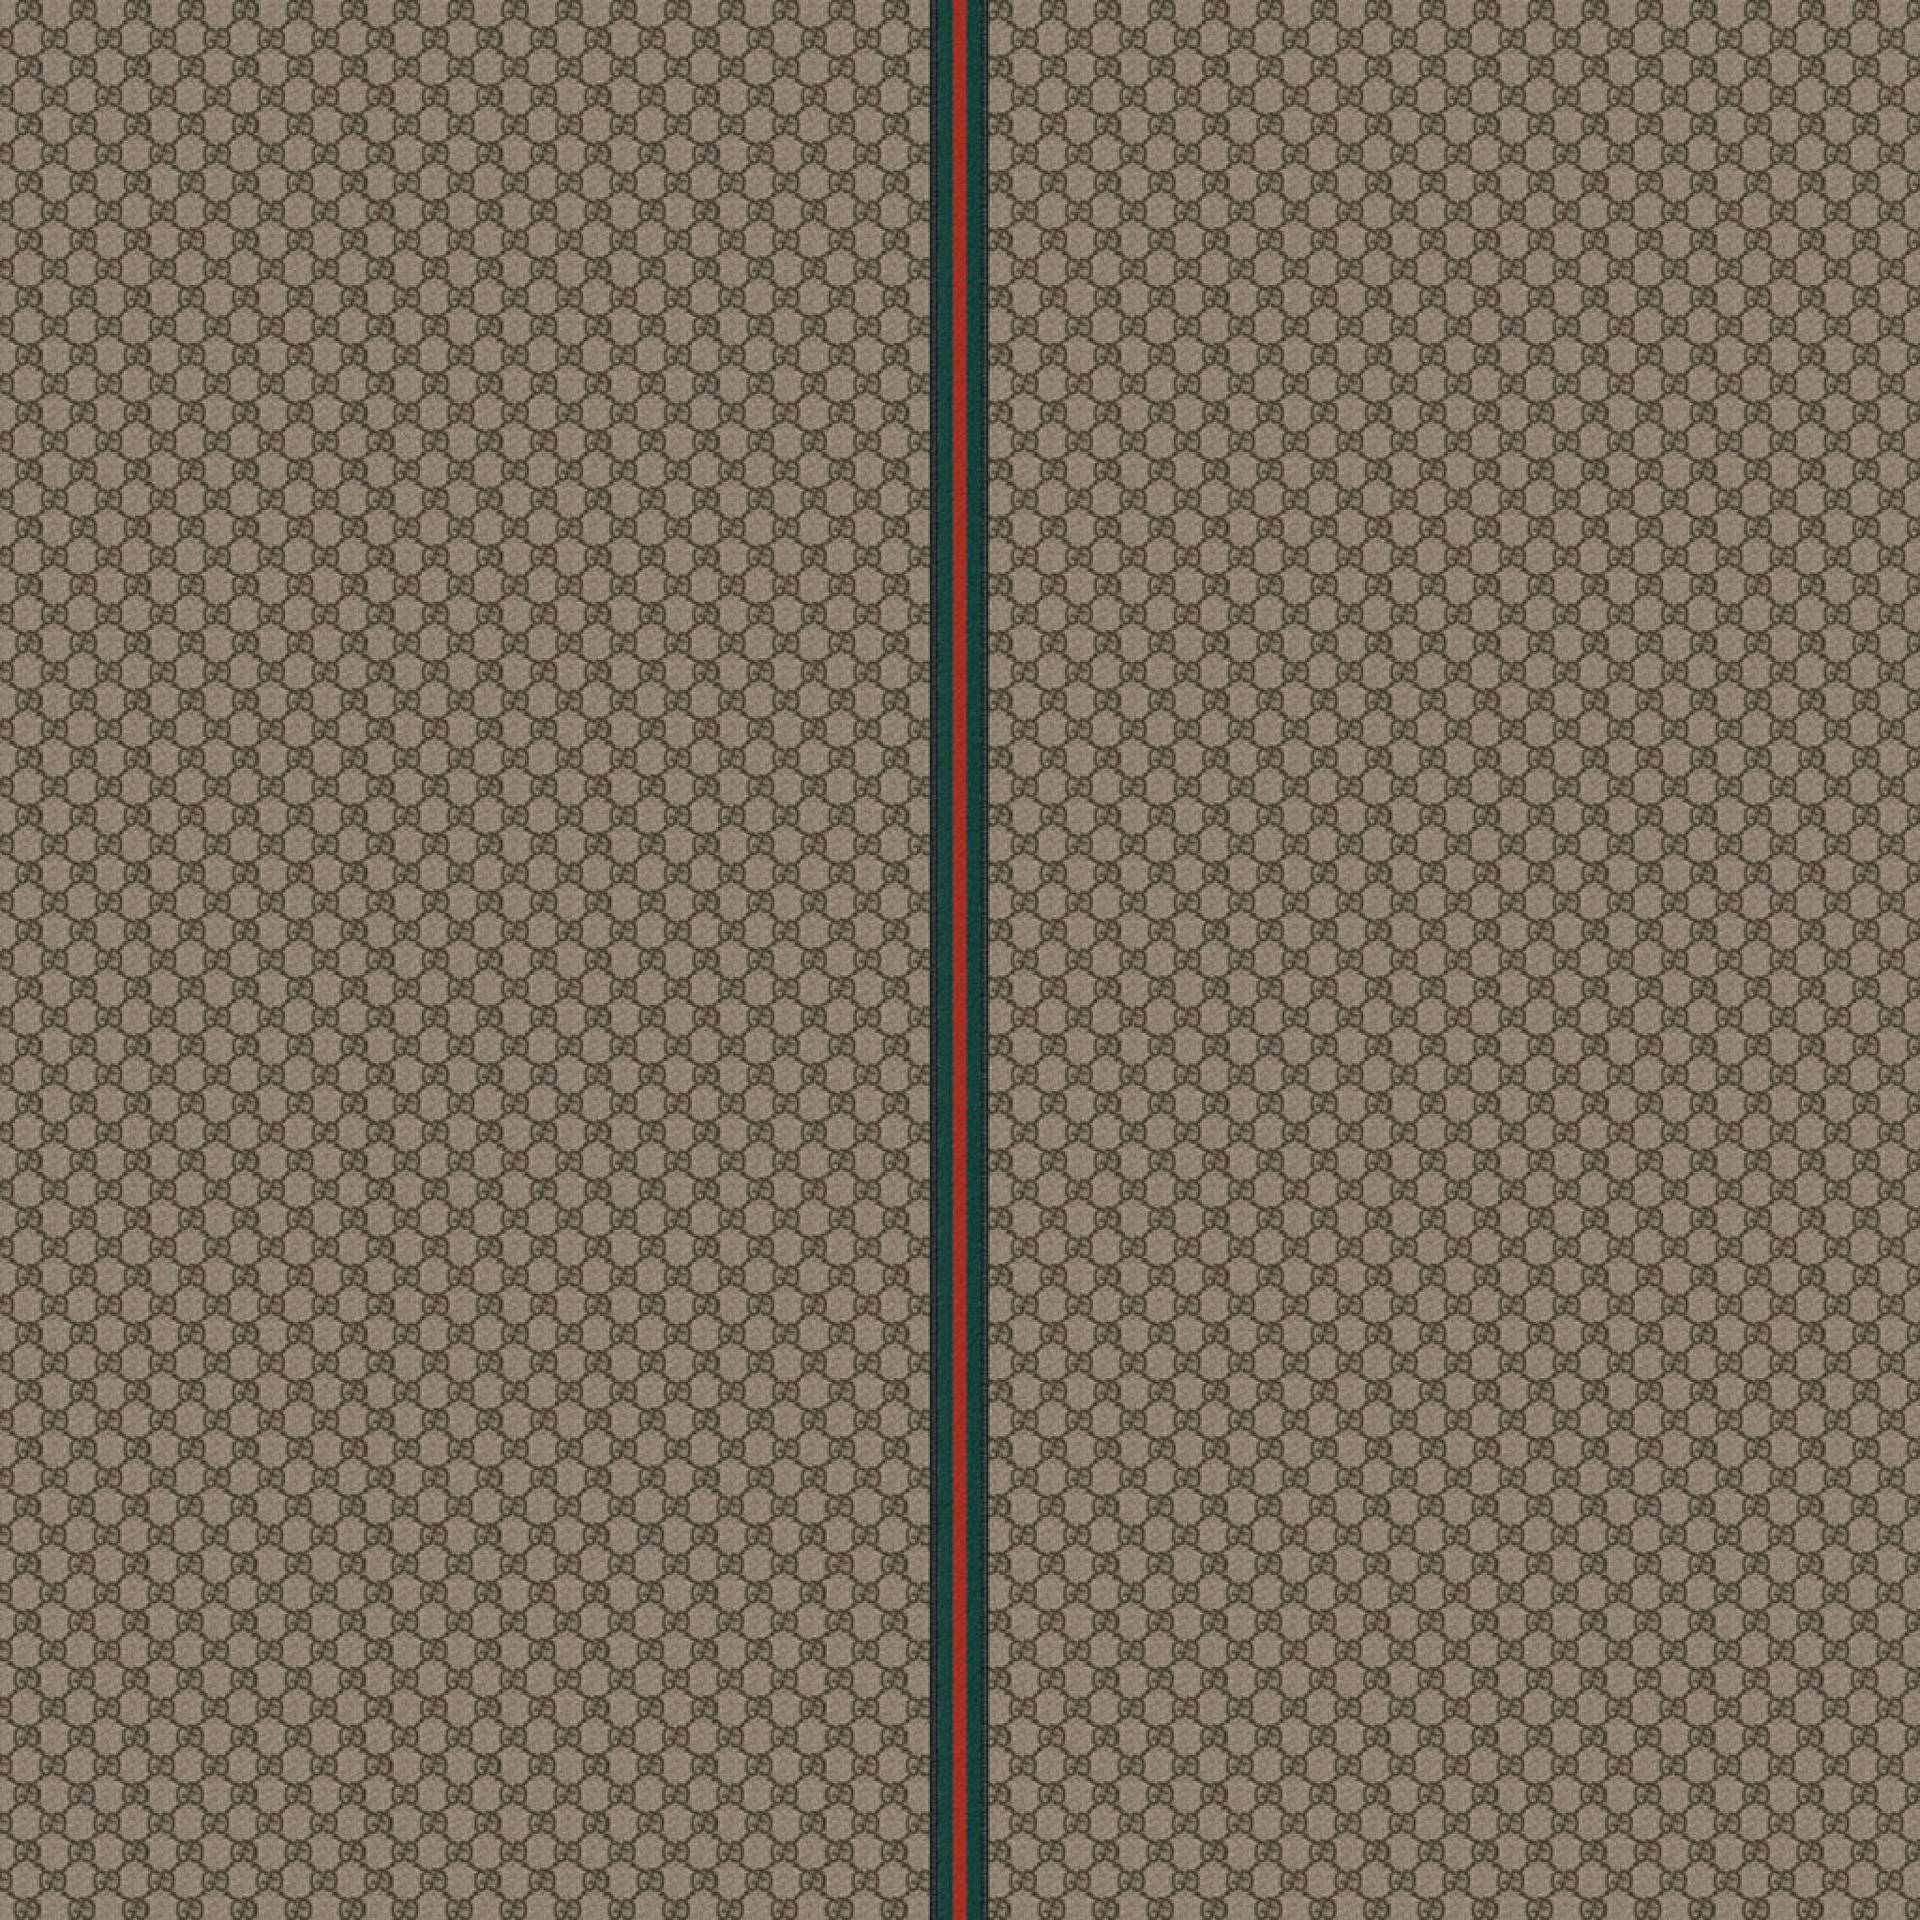 Leather Gucci Pattern Background